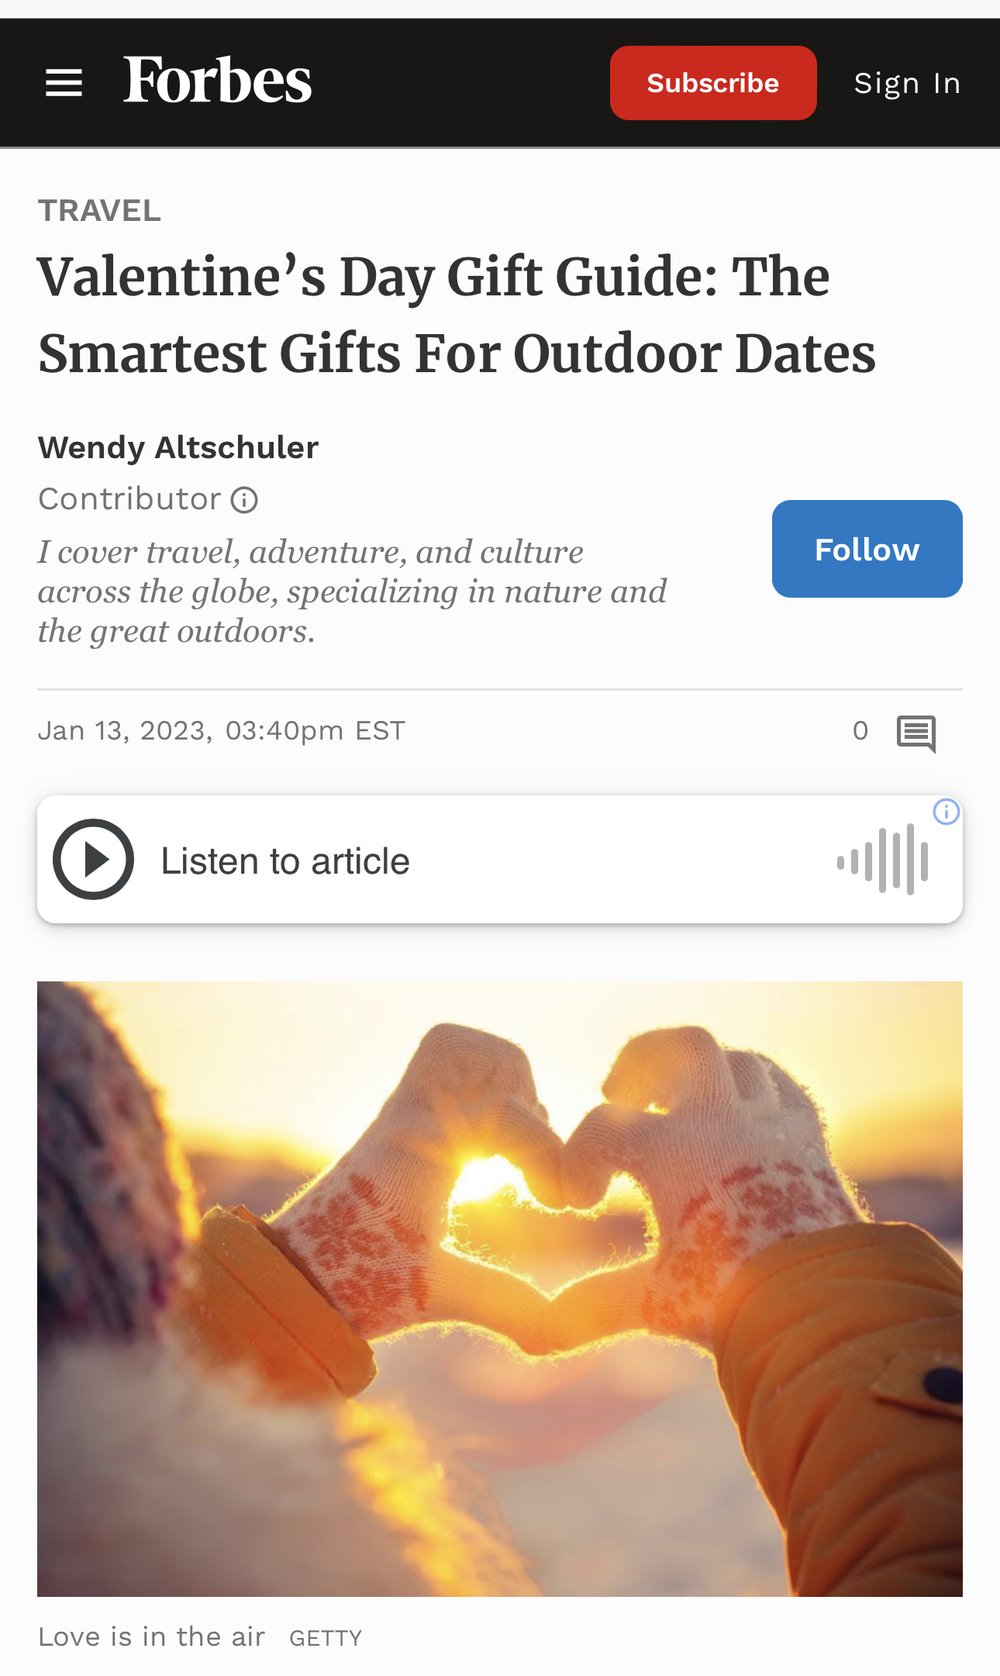 Valentine’s Day Gift Guide: The Smartest Gifts For Outdoor Dates